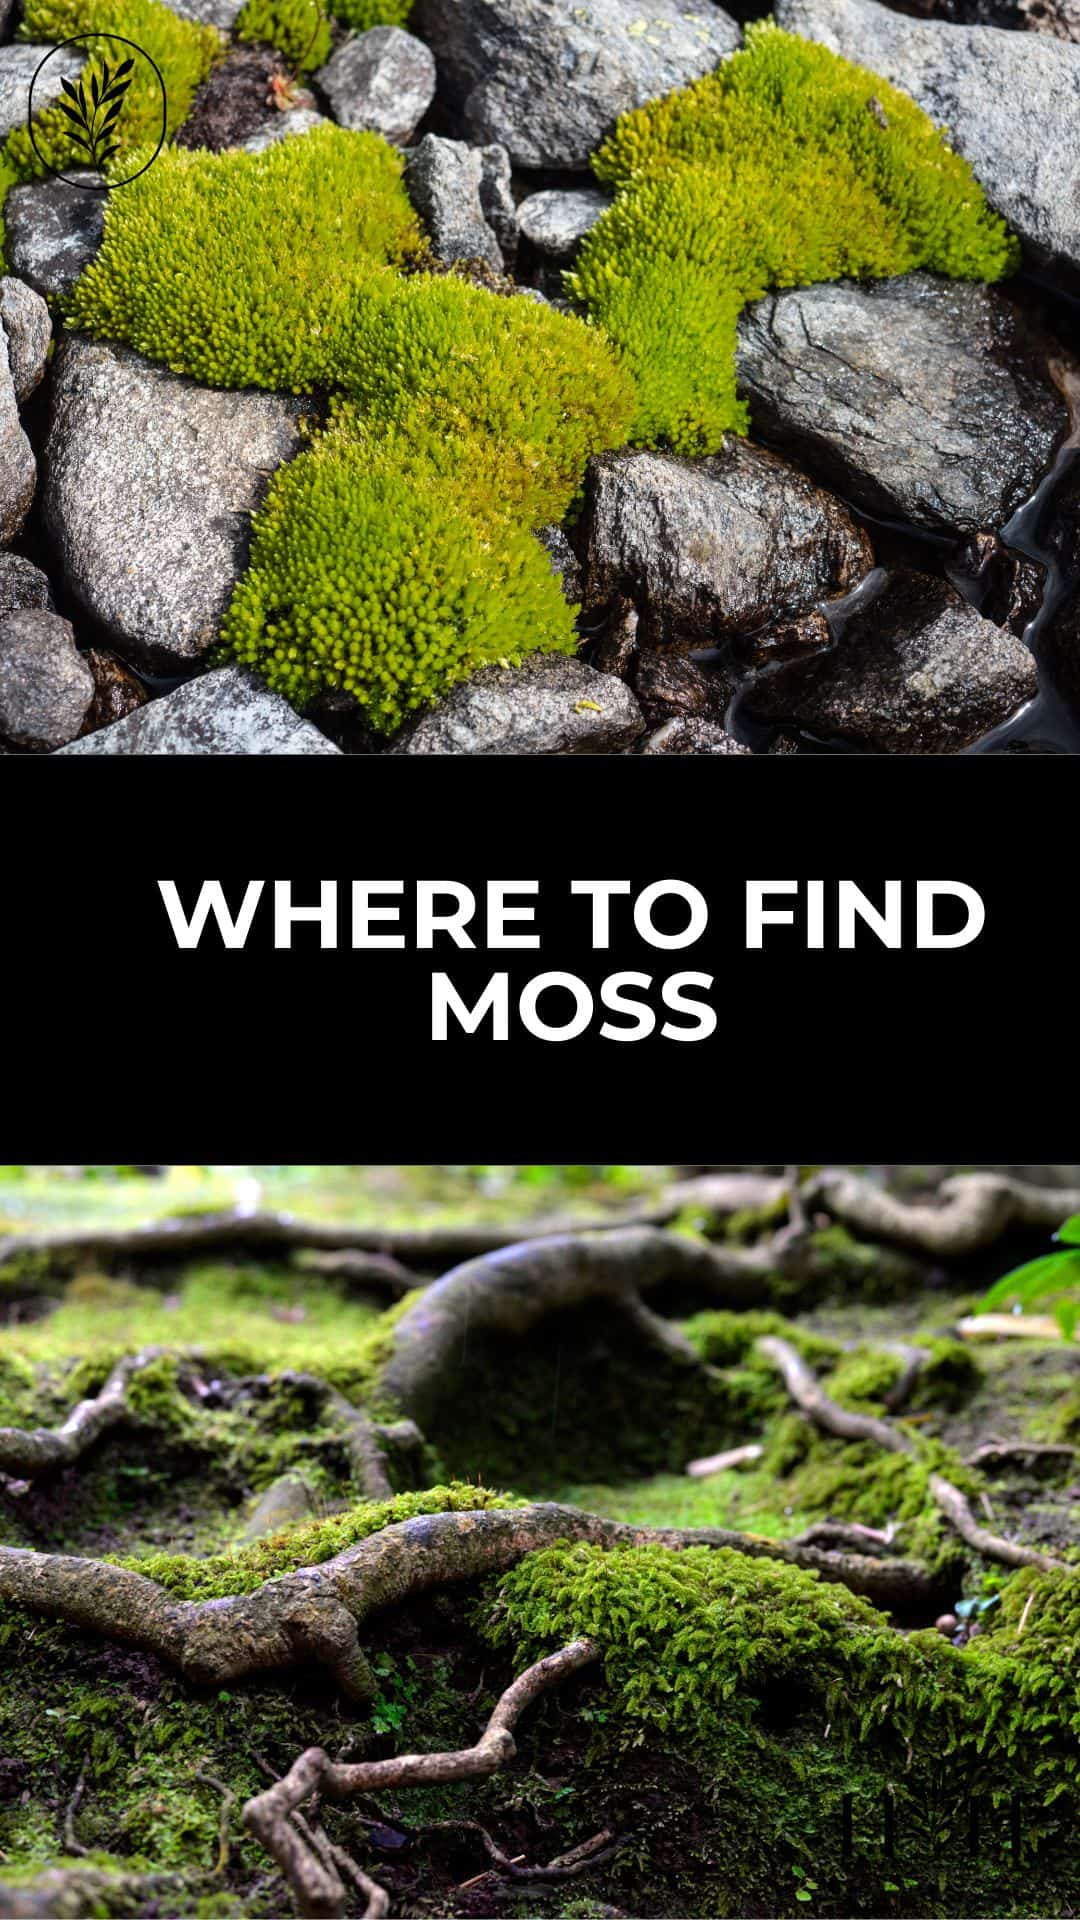 Where to find moss to use in crafts and floral art (and how to collect moss) via @home4theharvest